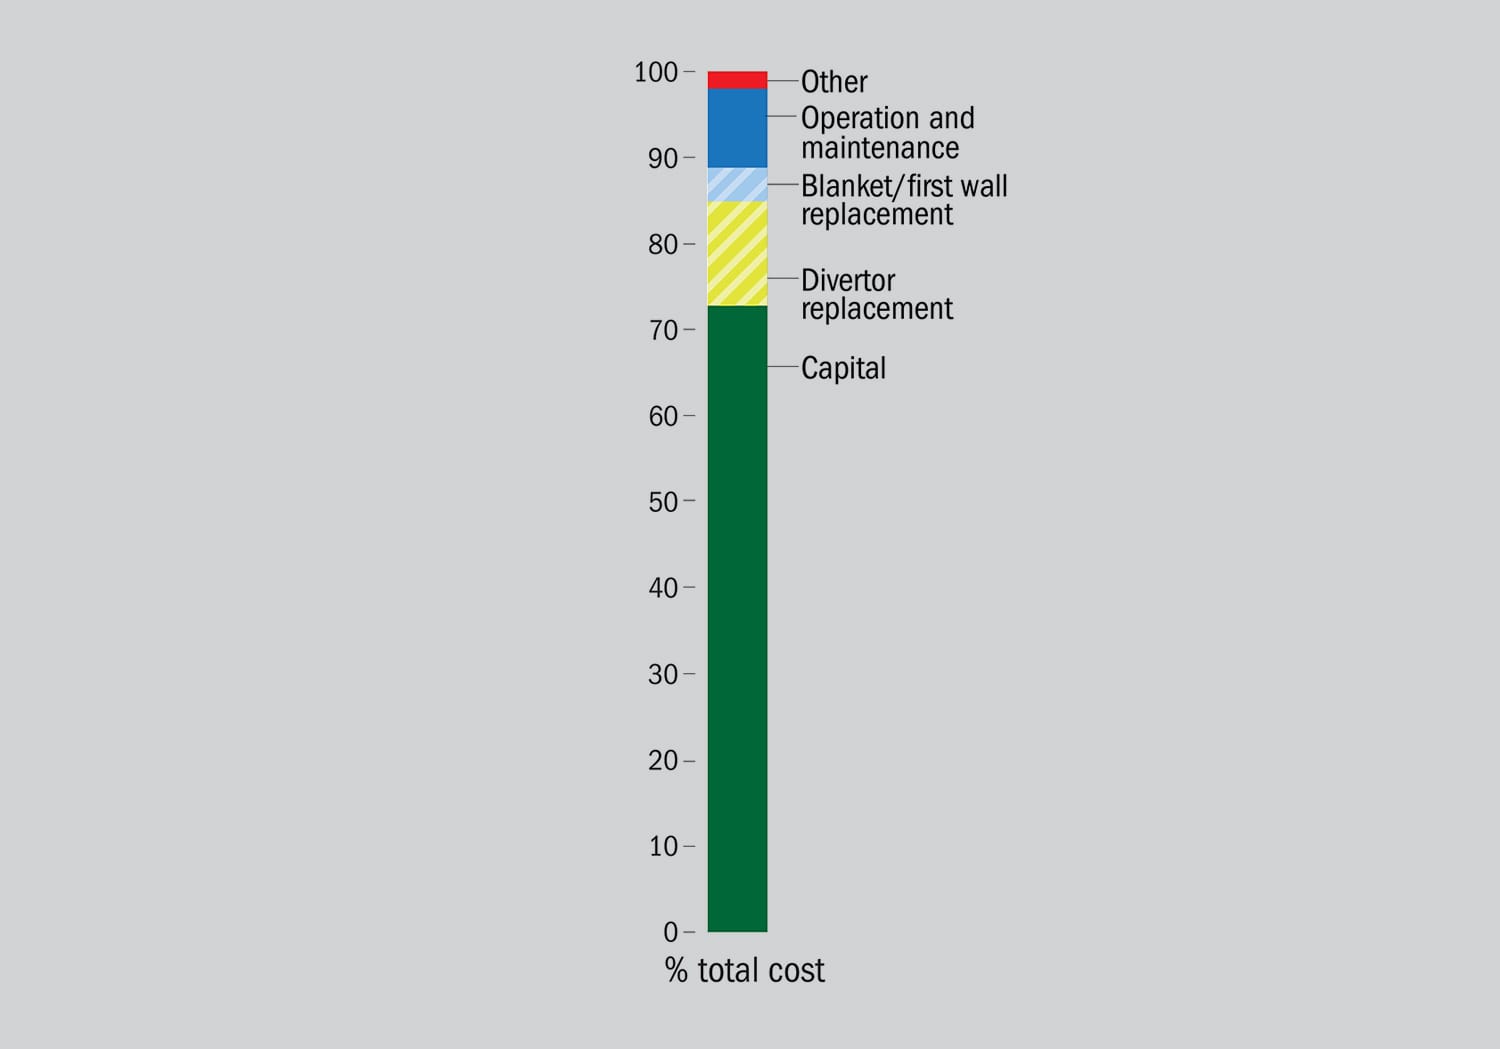 Components of the total cost of electricity produced by a magnetic confinement fusion reactor, shown as a percent of total cost. The two components shown with stripes are costs for replacement of critical elements of the reactor whose lifetime, due to neutron bombardment, could be much shorter than the rest of the reactor. Source: [2].